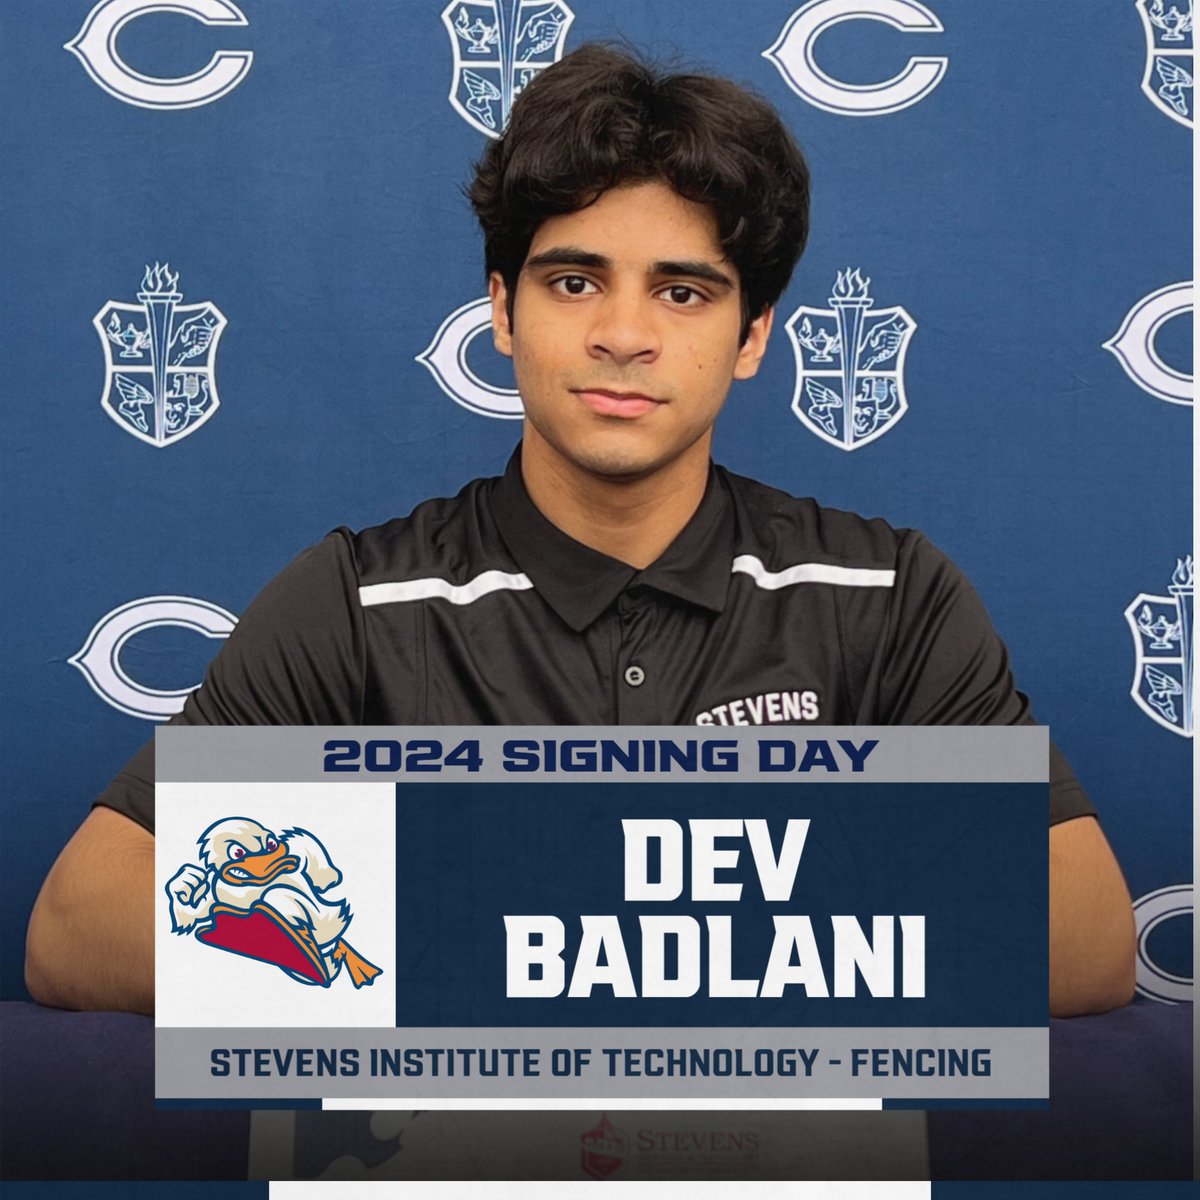 Congratulations to Dev Badlani who has committed to compete in fencing for Stevens Institute of Technology next year! Best of Luck as you continue your athletic career! @ChathamCougars @Athletics_CHS @ChathamsTAP @dailyrecordspts @ChathamCourier1 @ChathamHS @StevensDucks